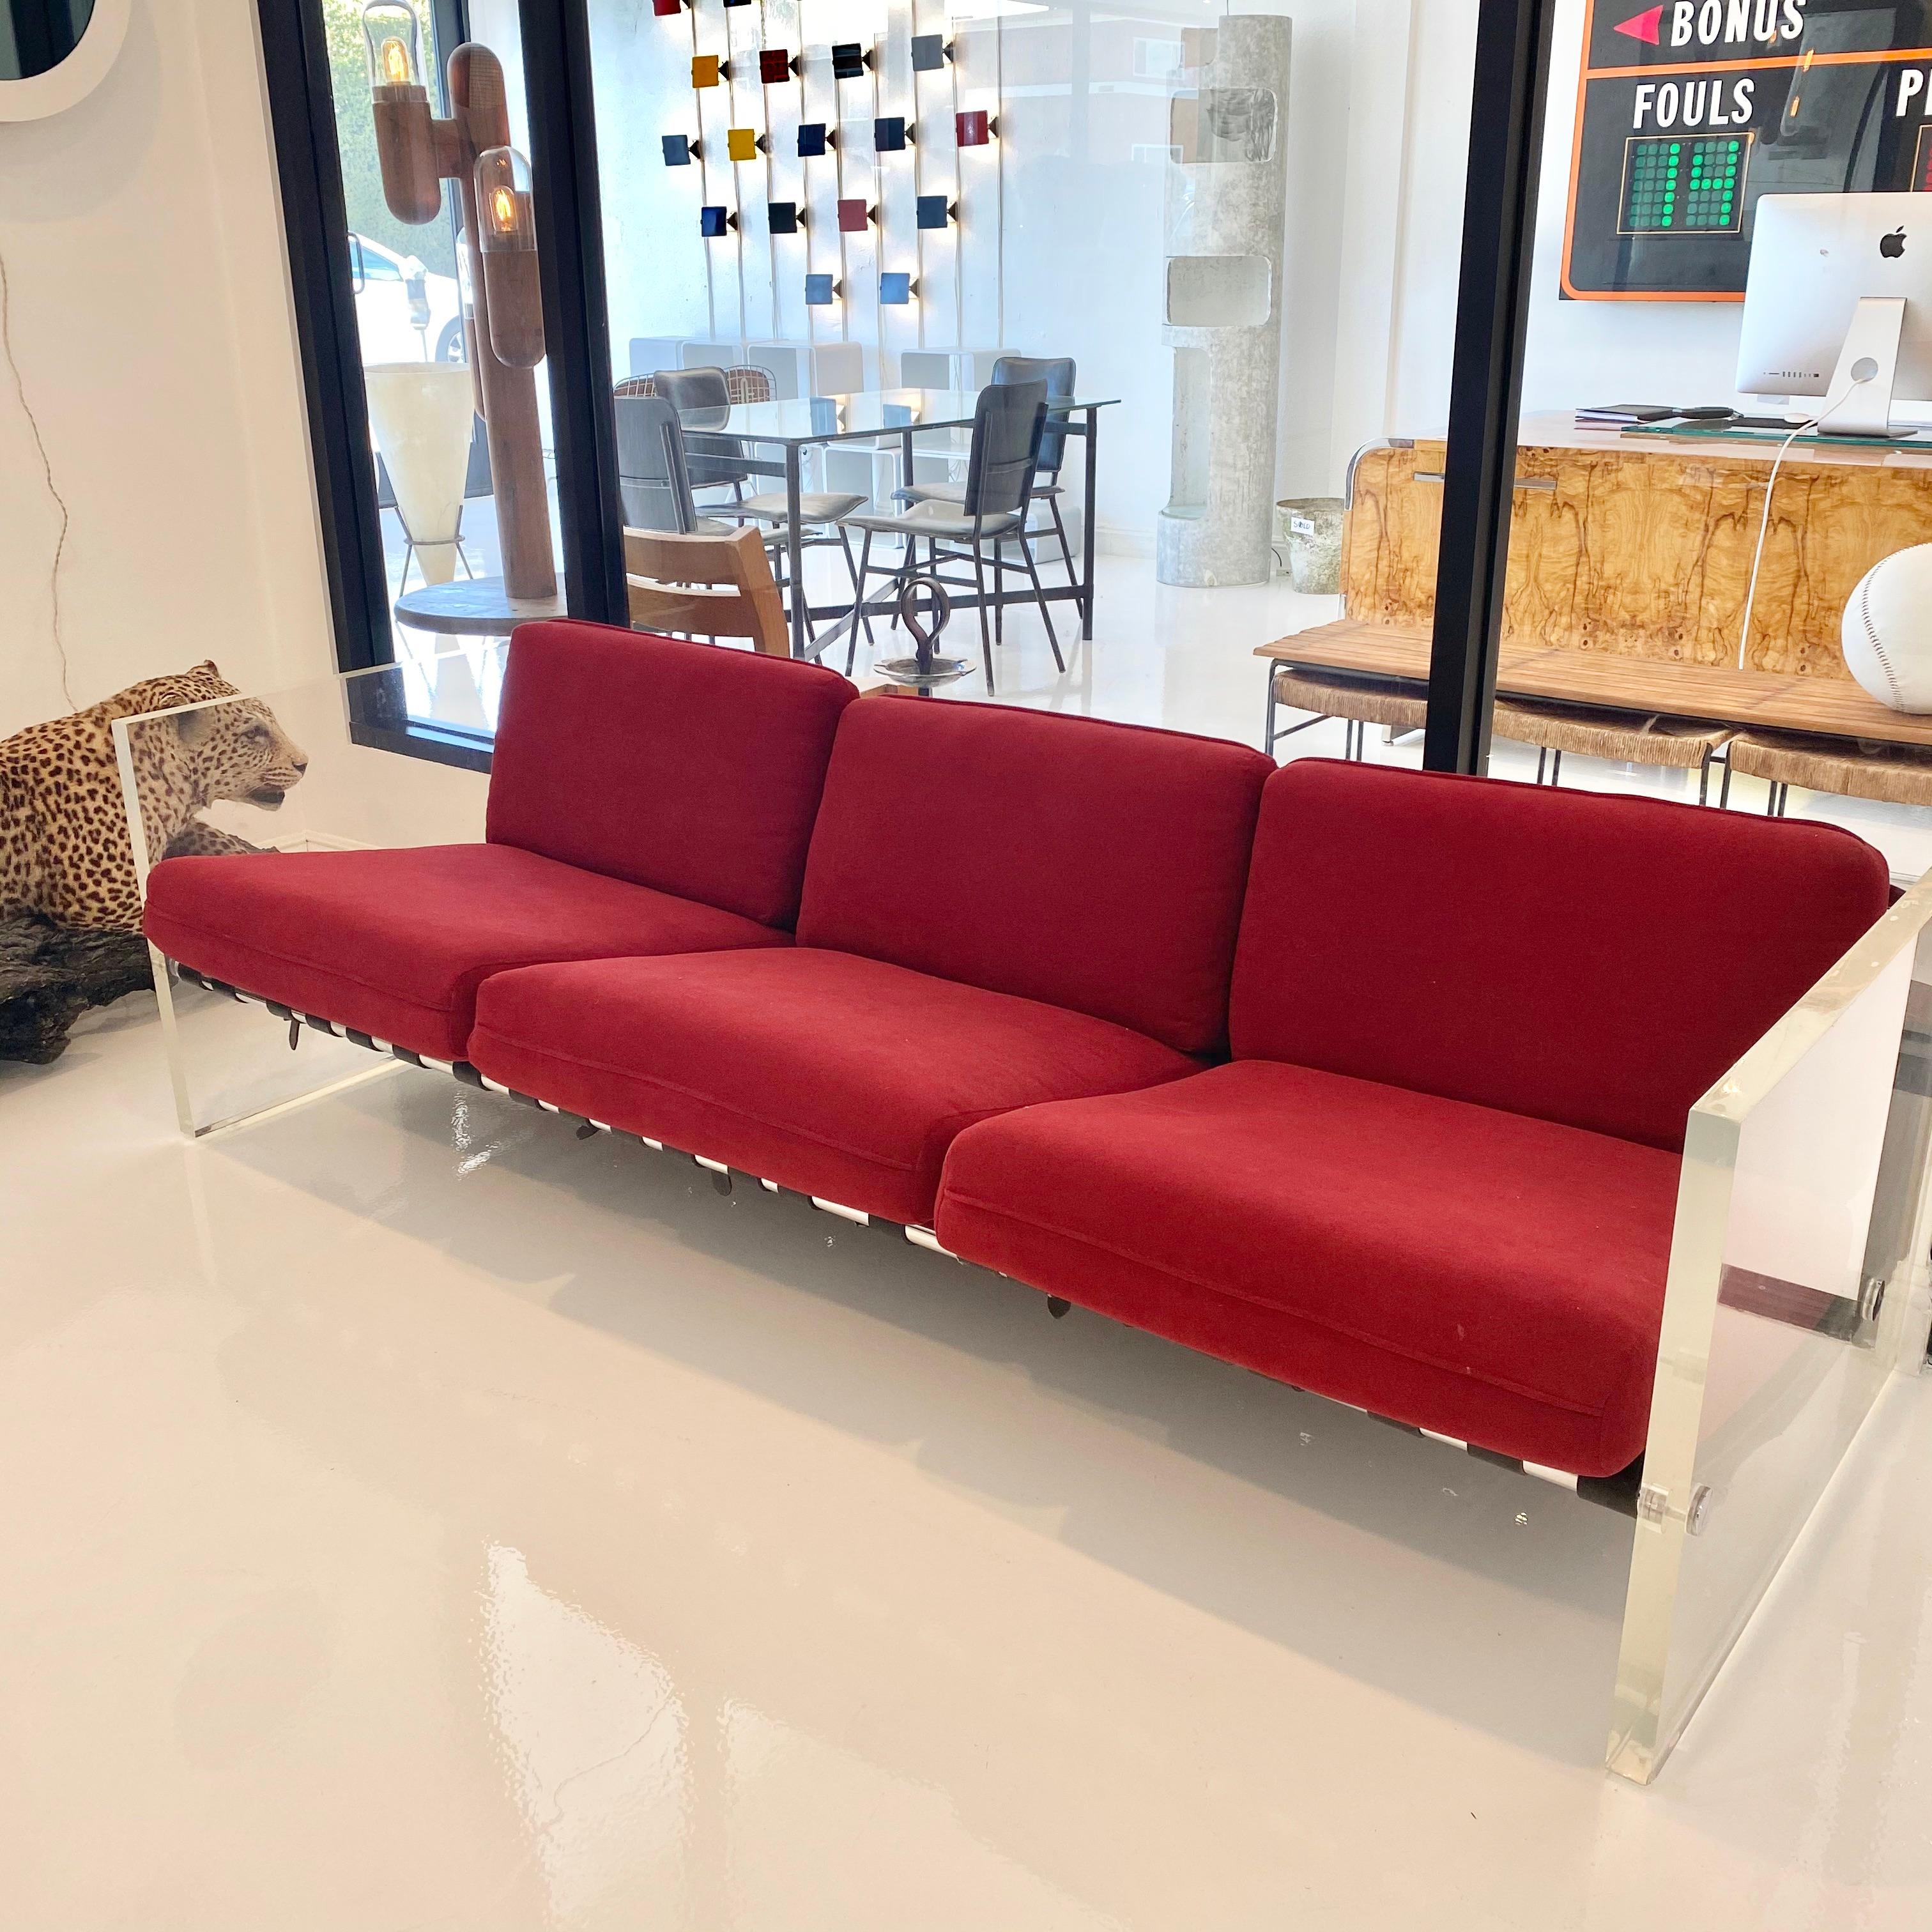 Fantastic Lucite sofa by Selig with black leather straps. There are three long nickel bars running through the length of the sofa holding the black leather seat straps and back cushion straps. The bars are capped by large nickel screws. Extremely